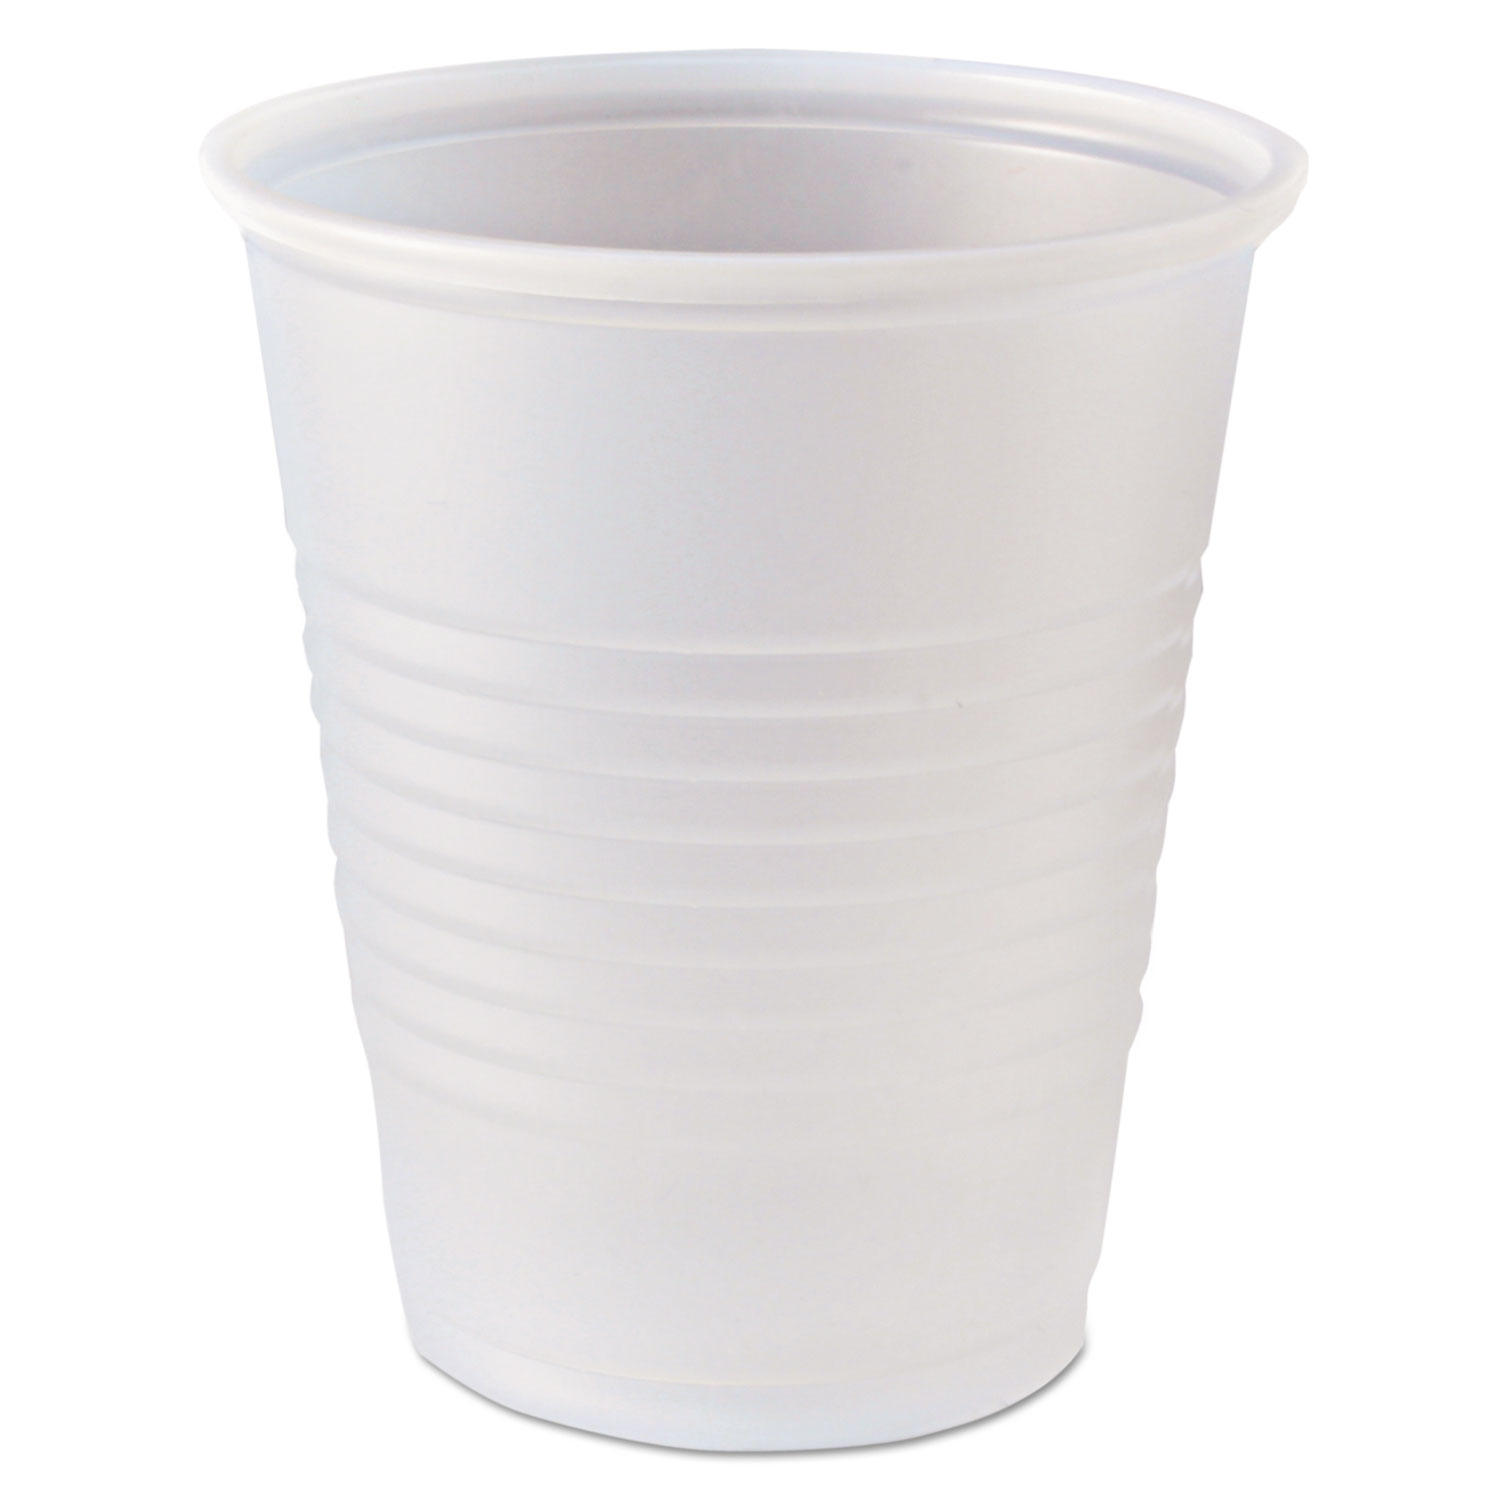  Fabri-Kal 9508020 RK Ribbed Cold Drink Cups, 5 oz, Clear, 2500/Carton (FABRK5) 